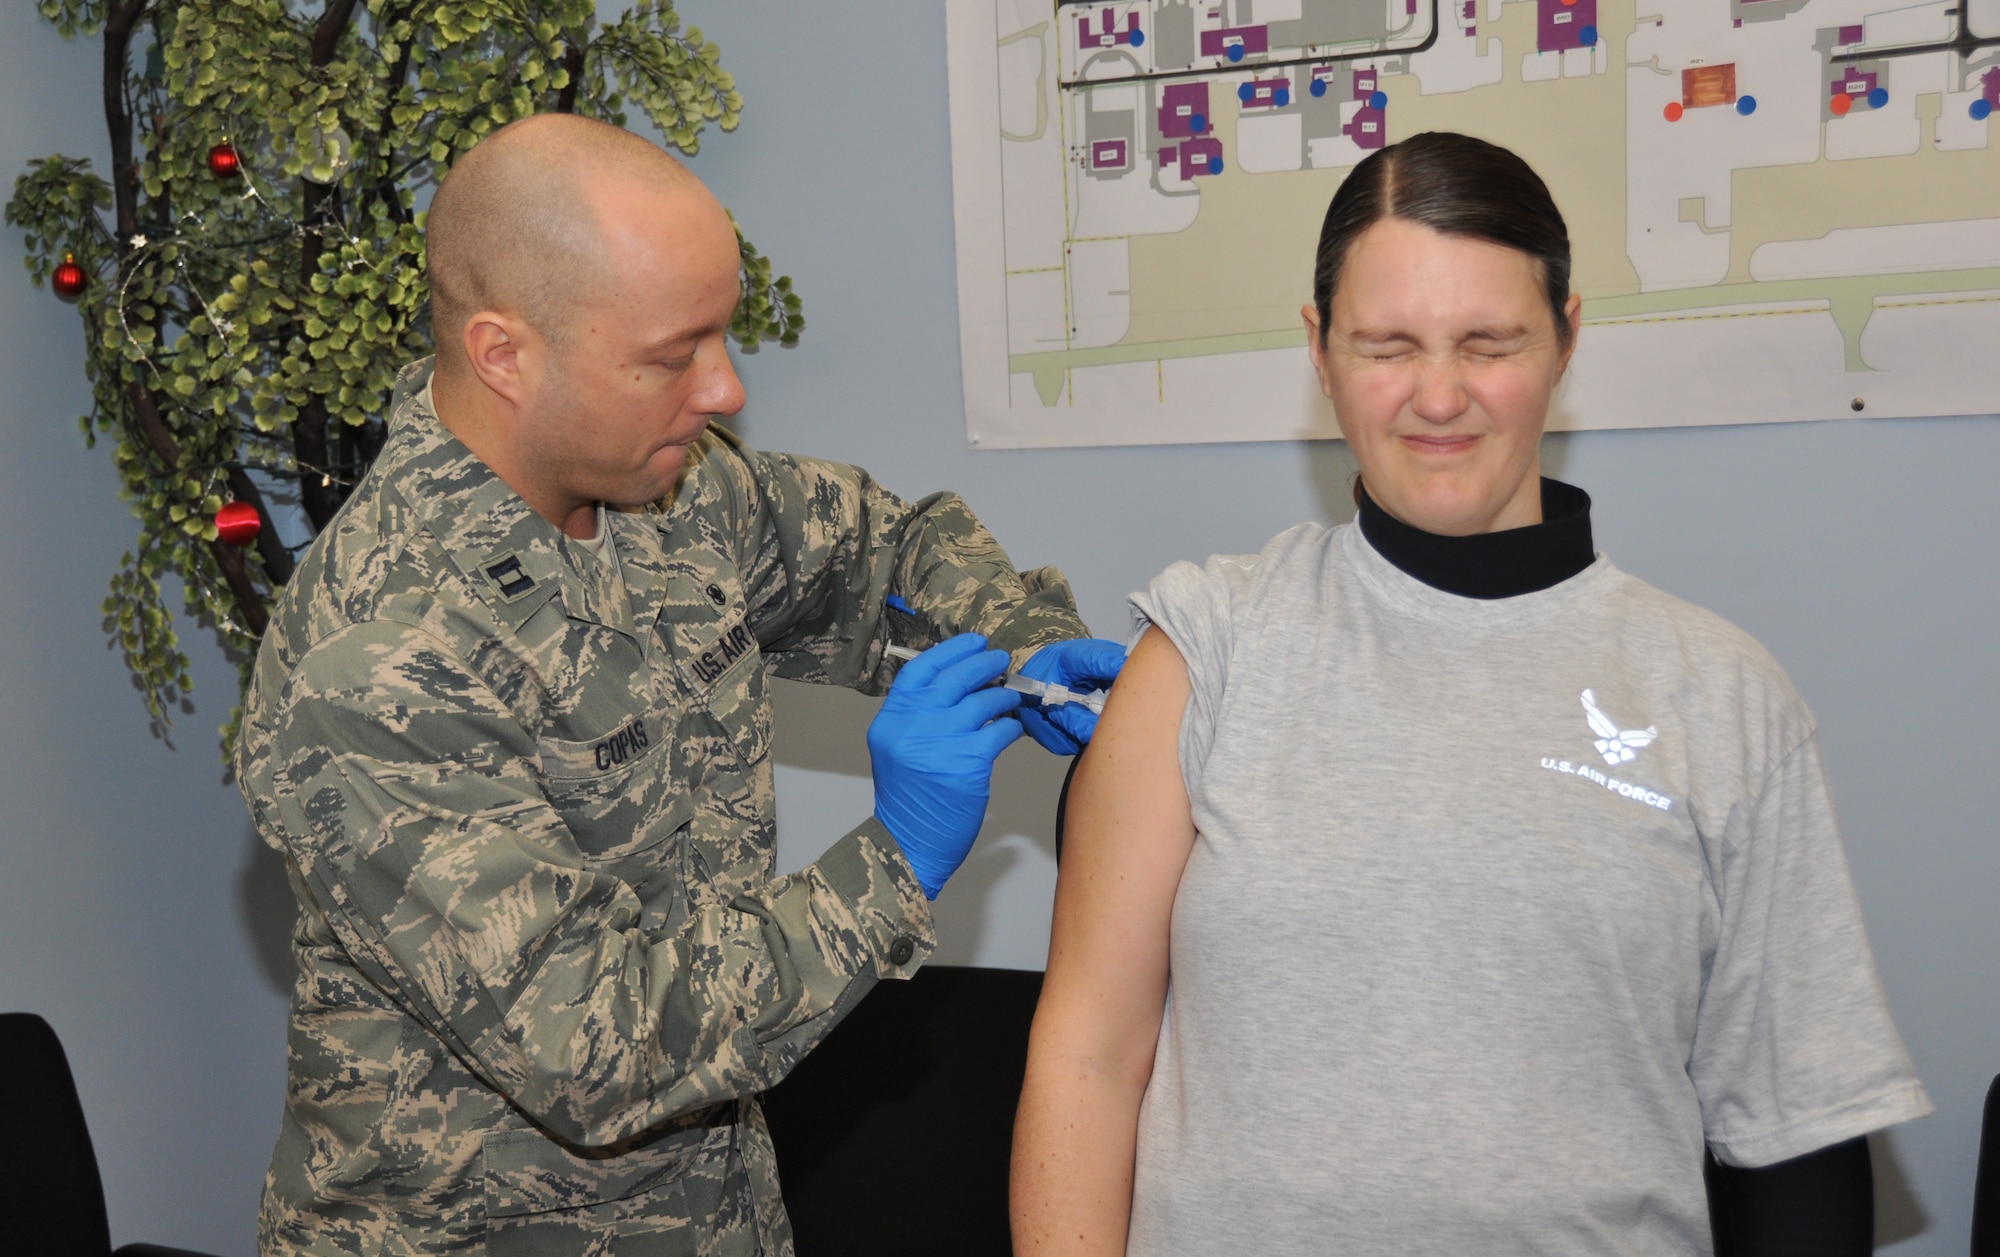 Master Sgt. Heather Jackson, 914th Communication Squadron, grimaces as Capt. John Copas, 914th Aeromedical Staging Squadron, administers the hepatitis B shot, here, April 5, 2014. The hepatitis B vaccine has recently been made mandatory for members who are or may be deploying in the near future. (U.S. Air Force photo by Staff Sgt. Stephanie Clark)  